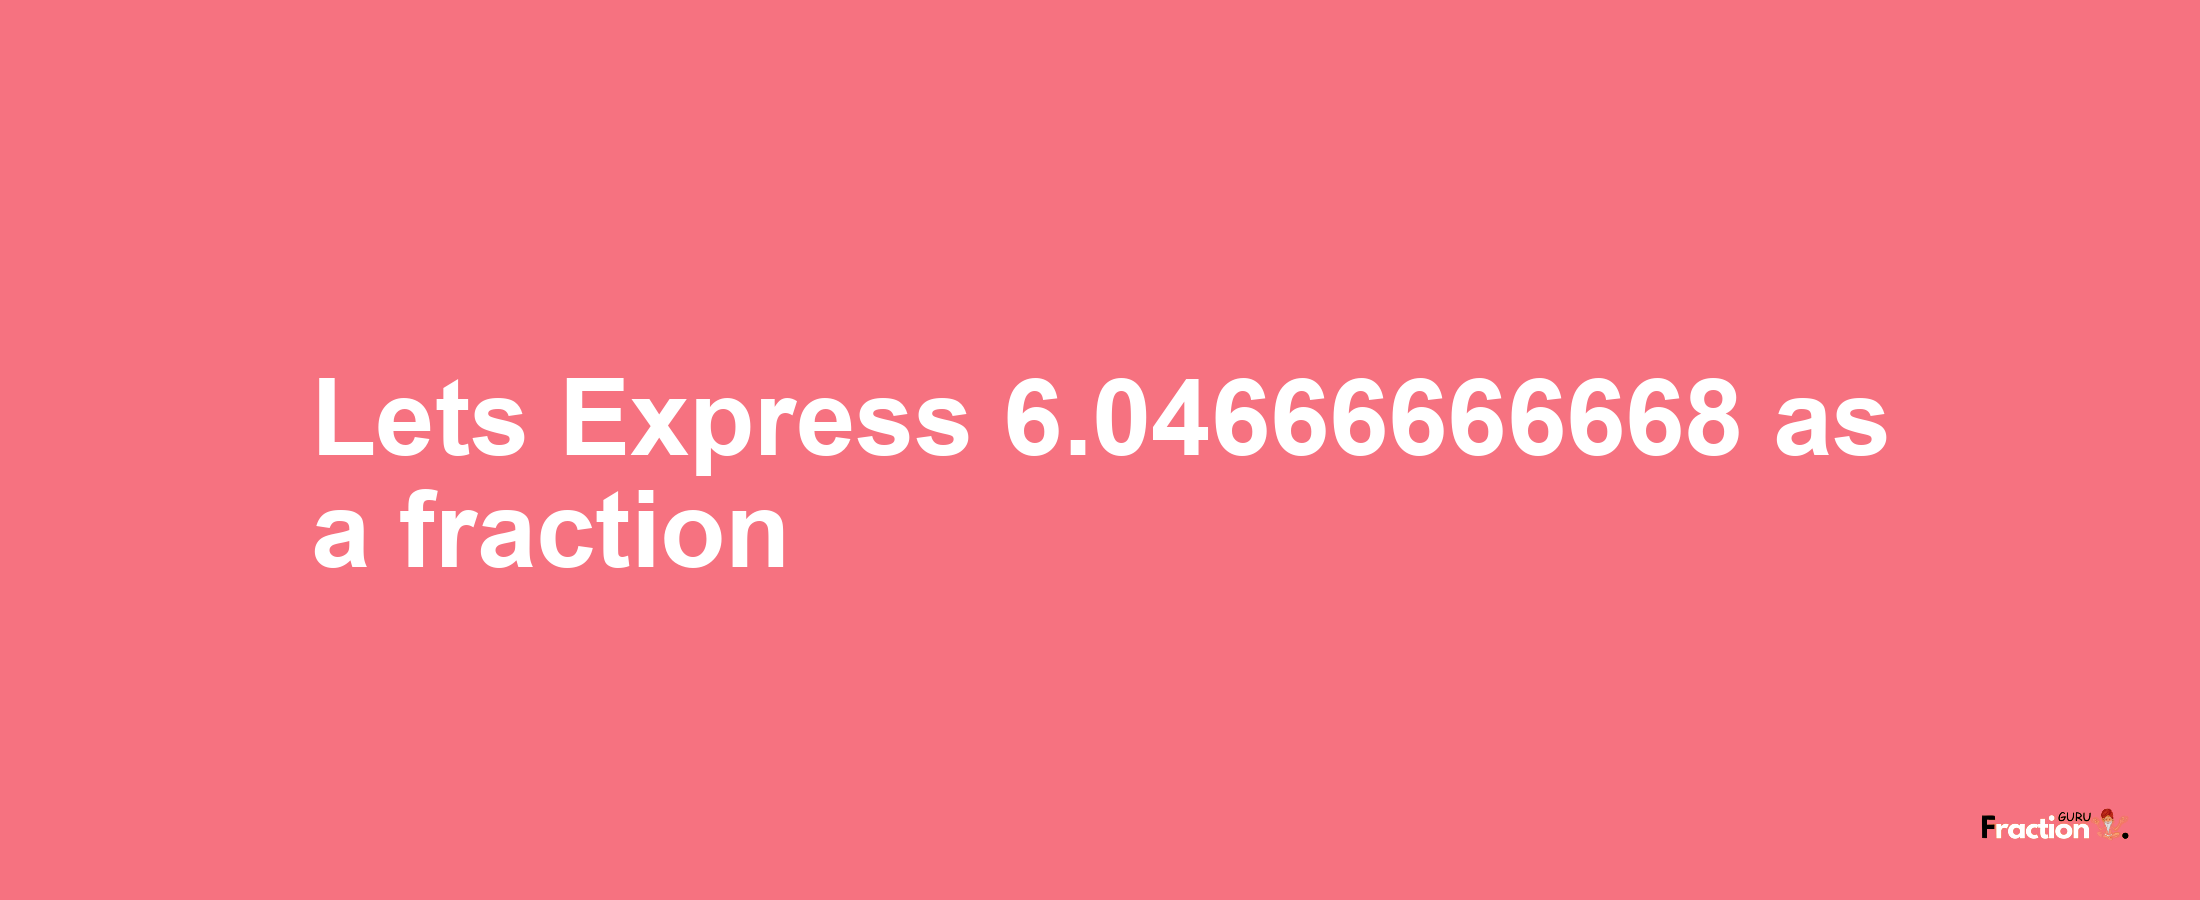 Lets Express 6.04666666668 as afraction